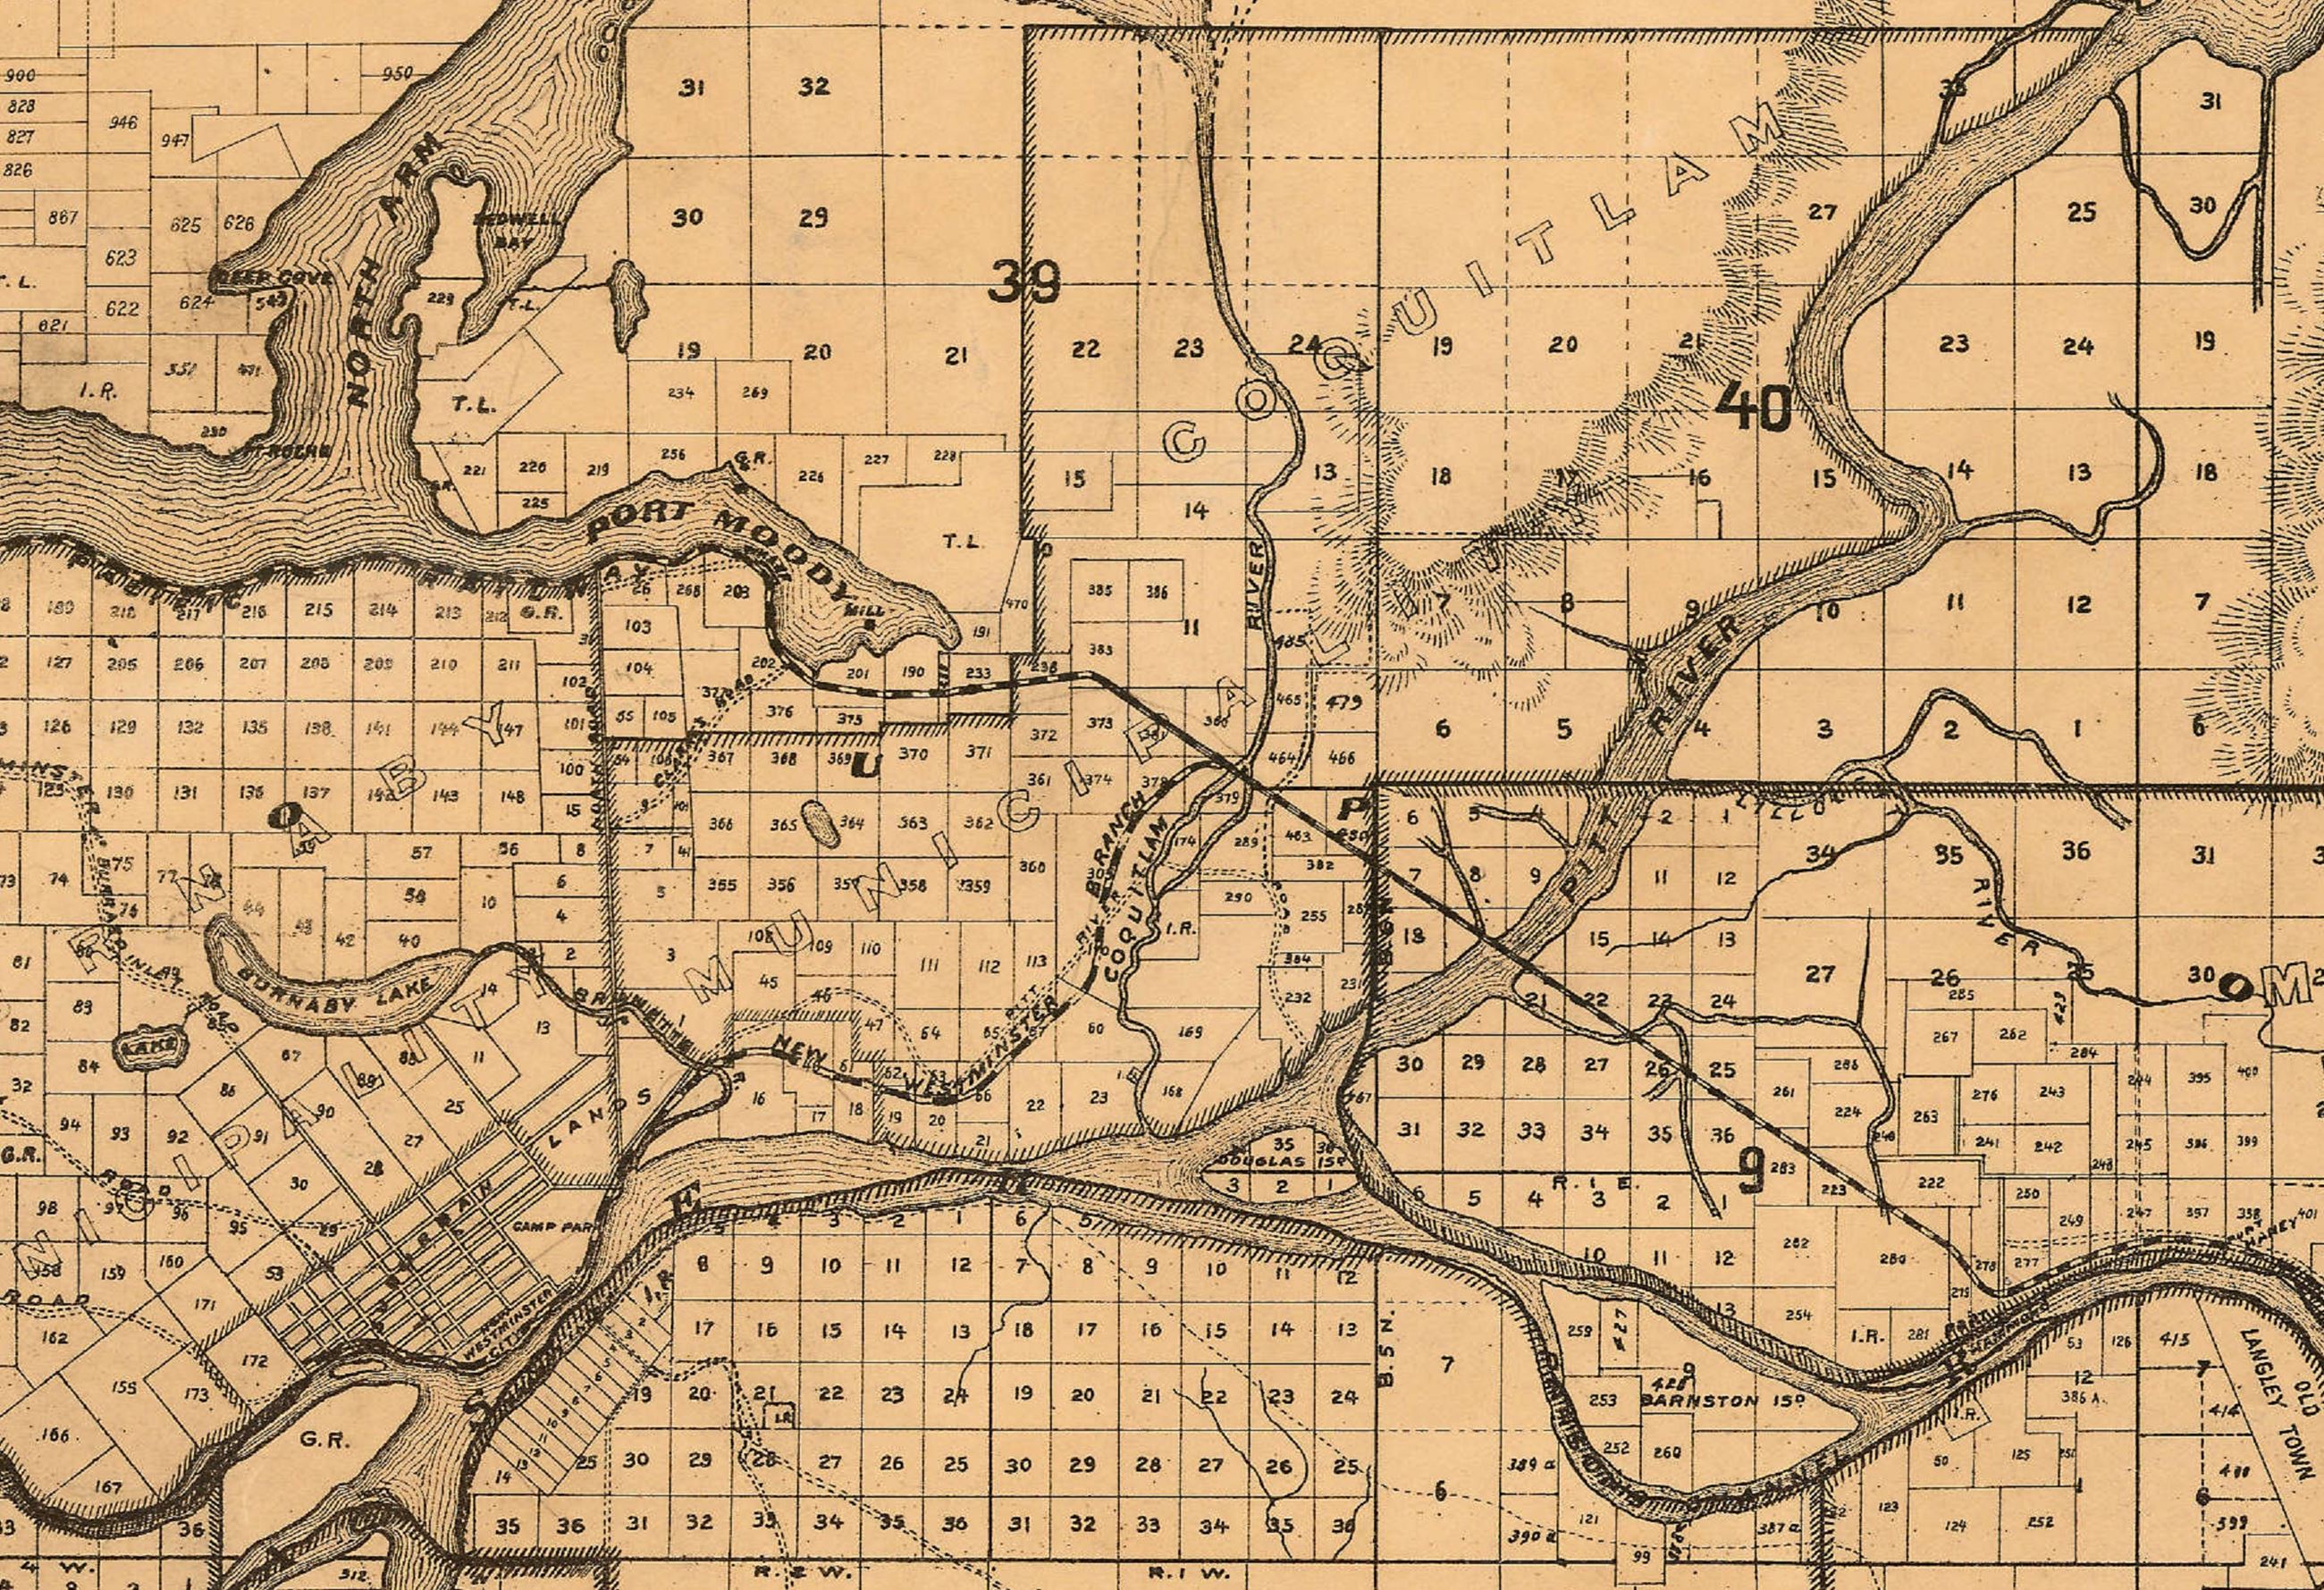 12 - A Portion of a Map of New Westminster District, 1892 (Source City of Vancouver Archives, MAP 44